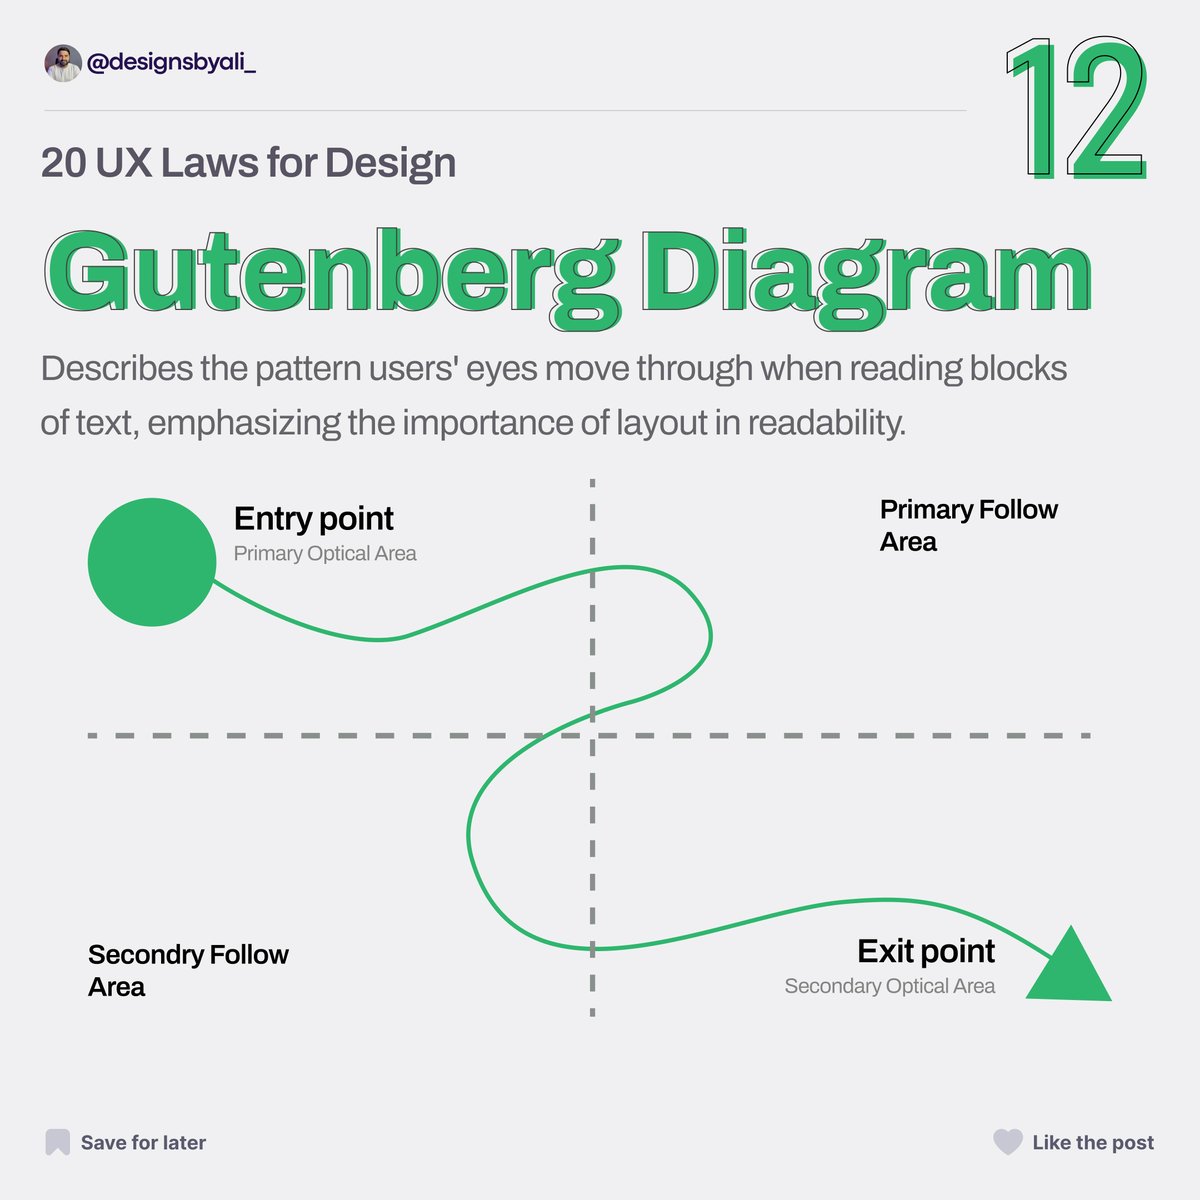 Top UX Laws: Gutenberg Diagram 👀
Describes the pattern users' eyes move through when reading blocks of text, emphasizing the importance of layout in readability.📖

#GutenbergDiagram #EyeMovement #Readability #Layout #Typography #DesignPrinciples #designsbyali #uidesigner #uiux